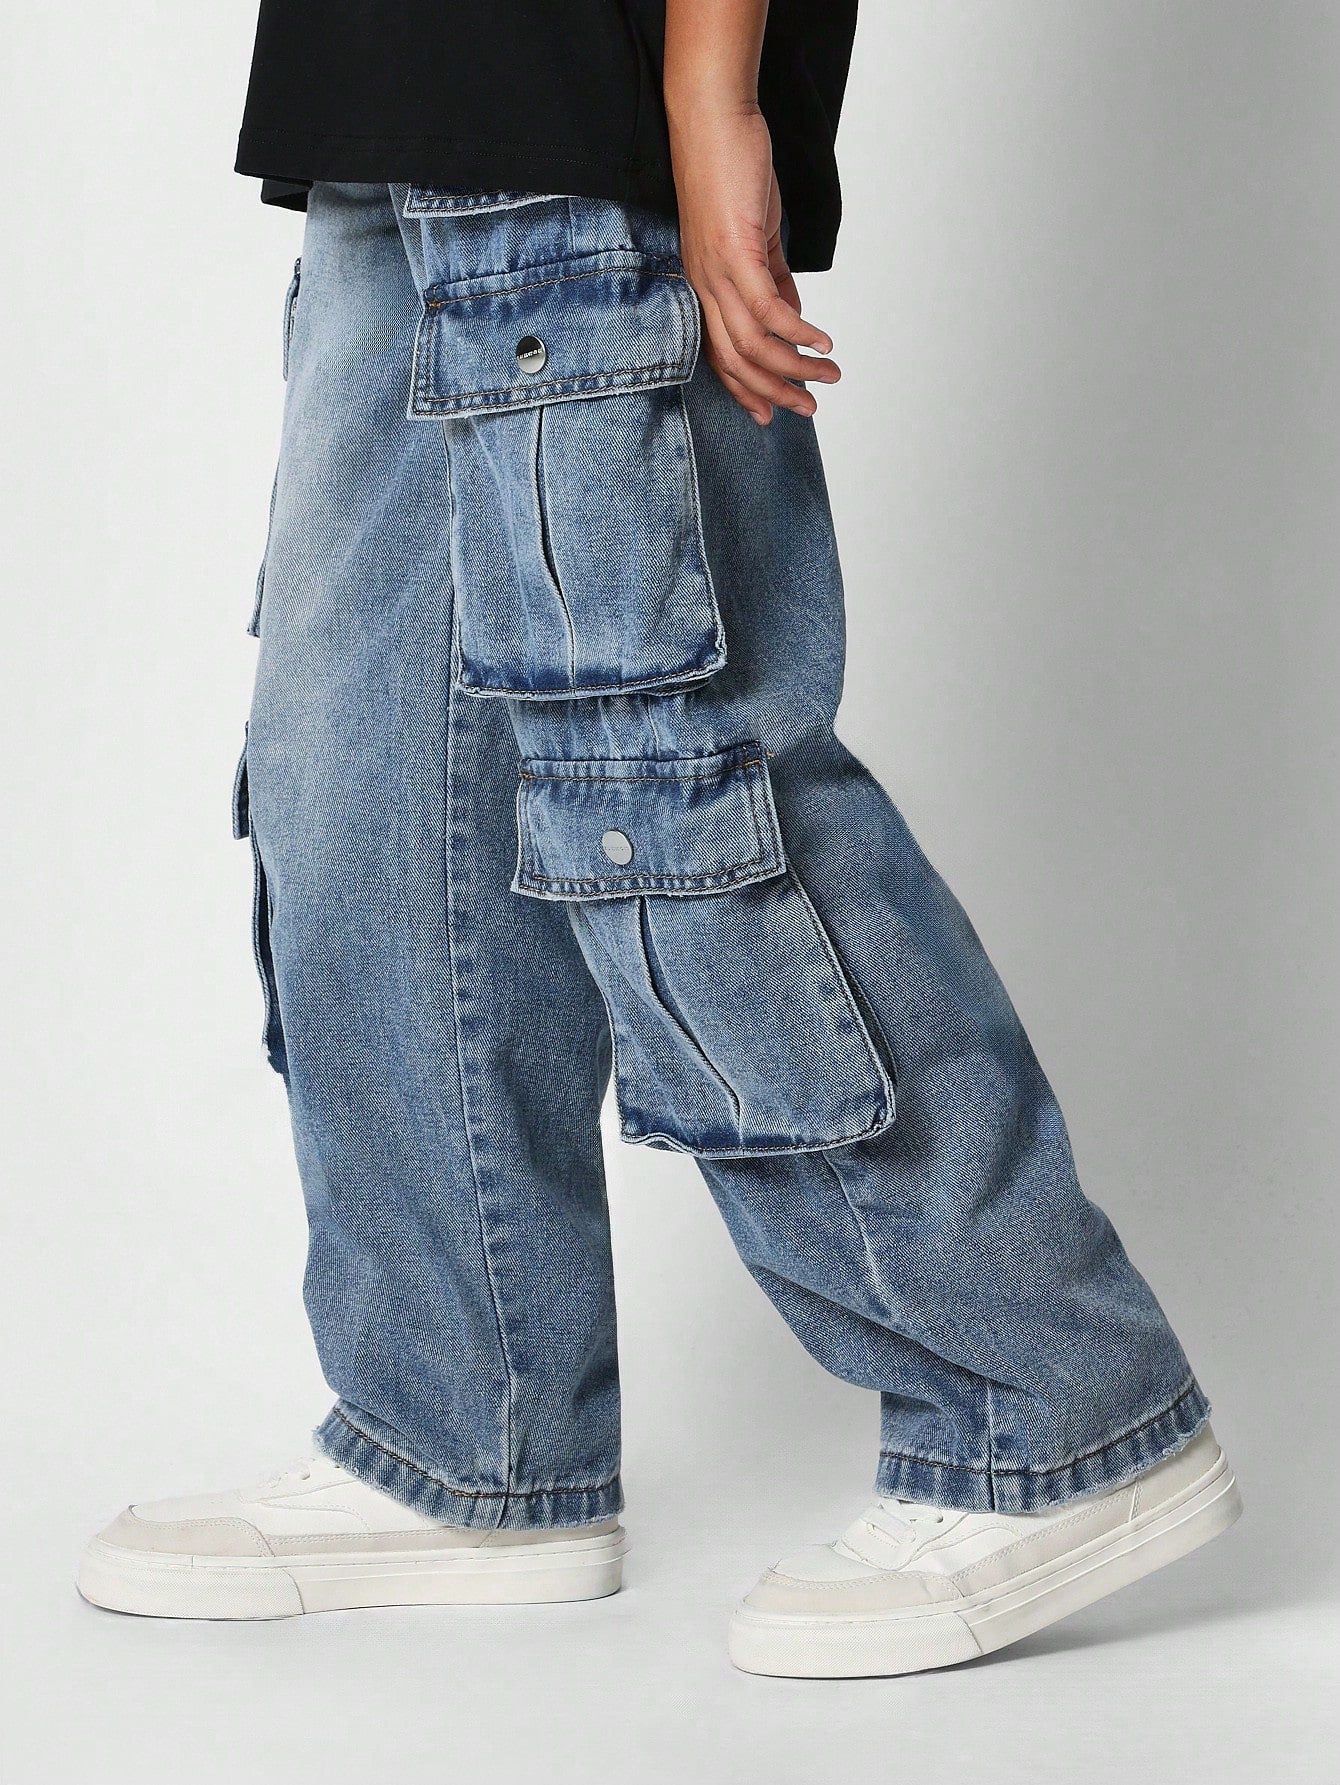 Kids Unisex Baggy Fit Cargo Jeans Back To School